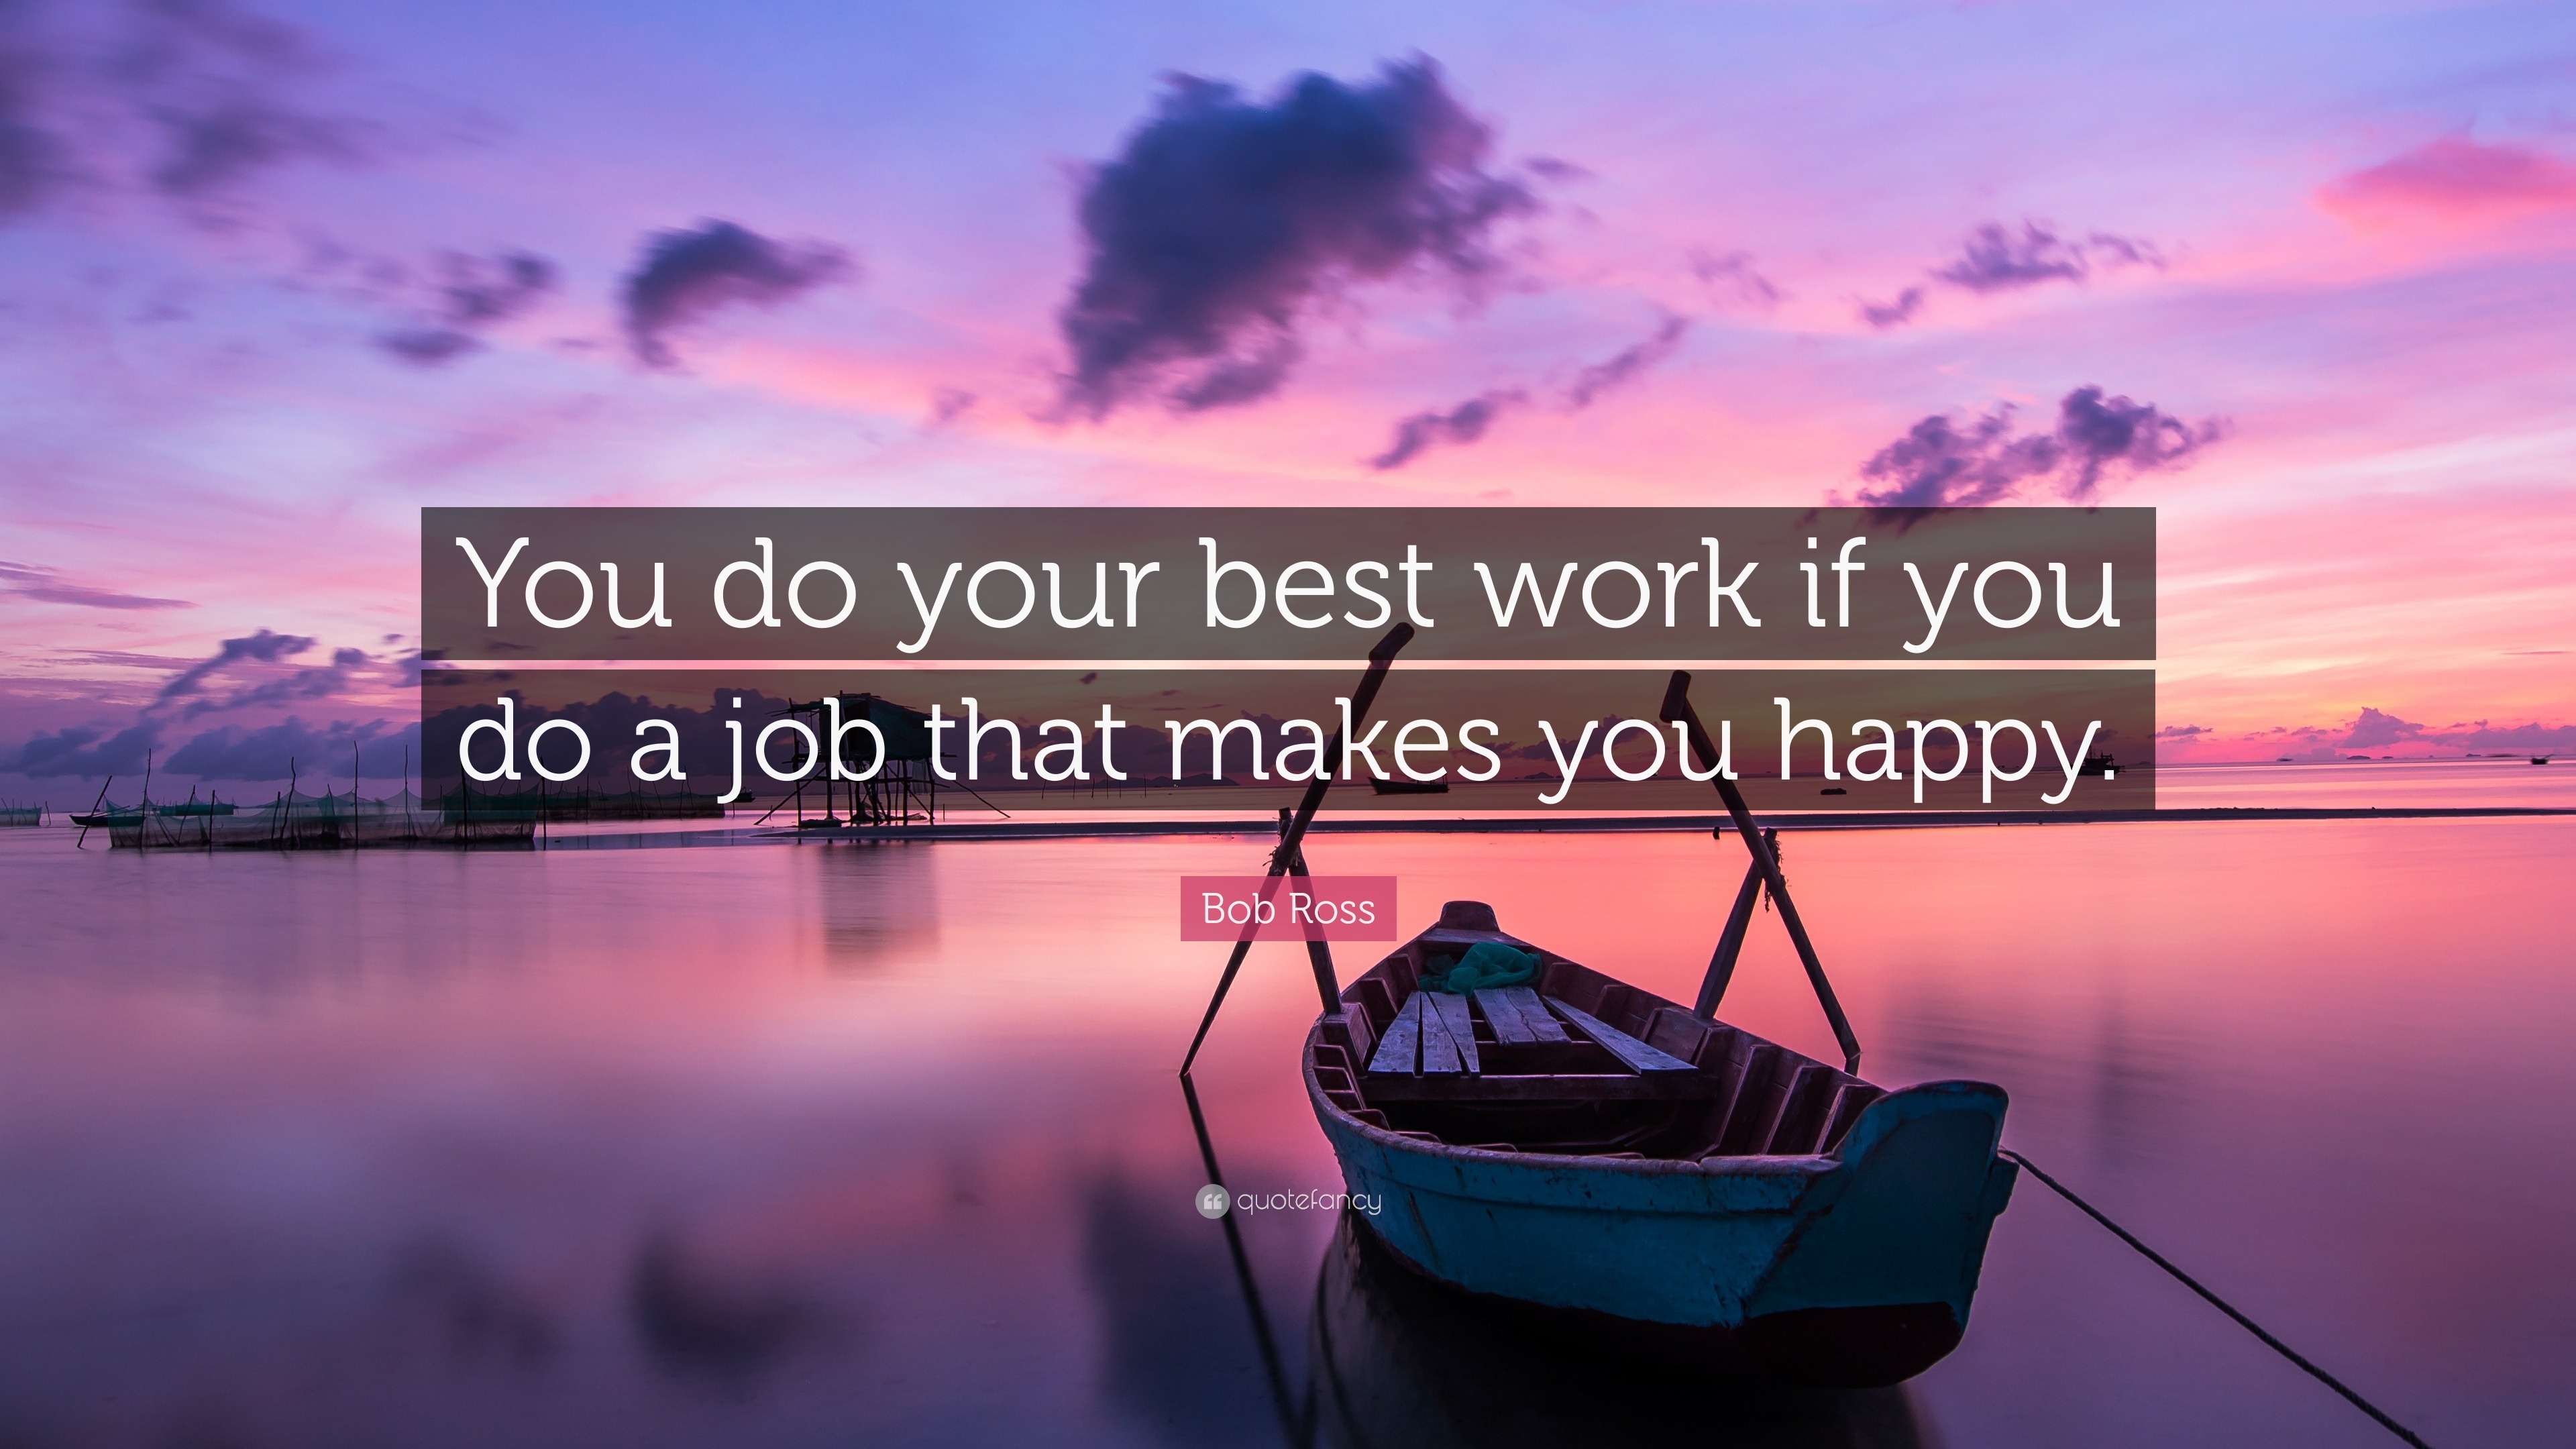 Bob Ross Quote “You do your best work if you do a job that makes you